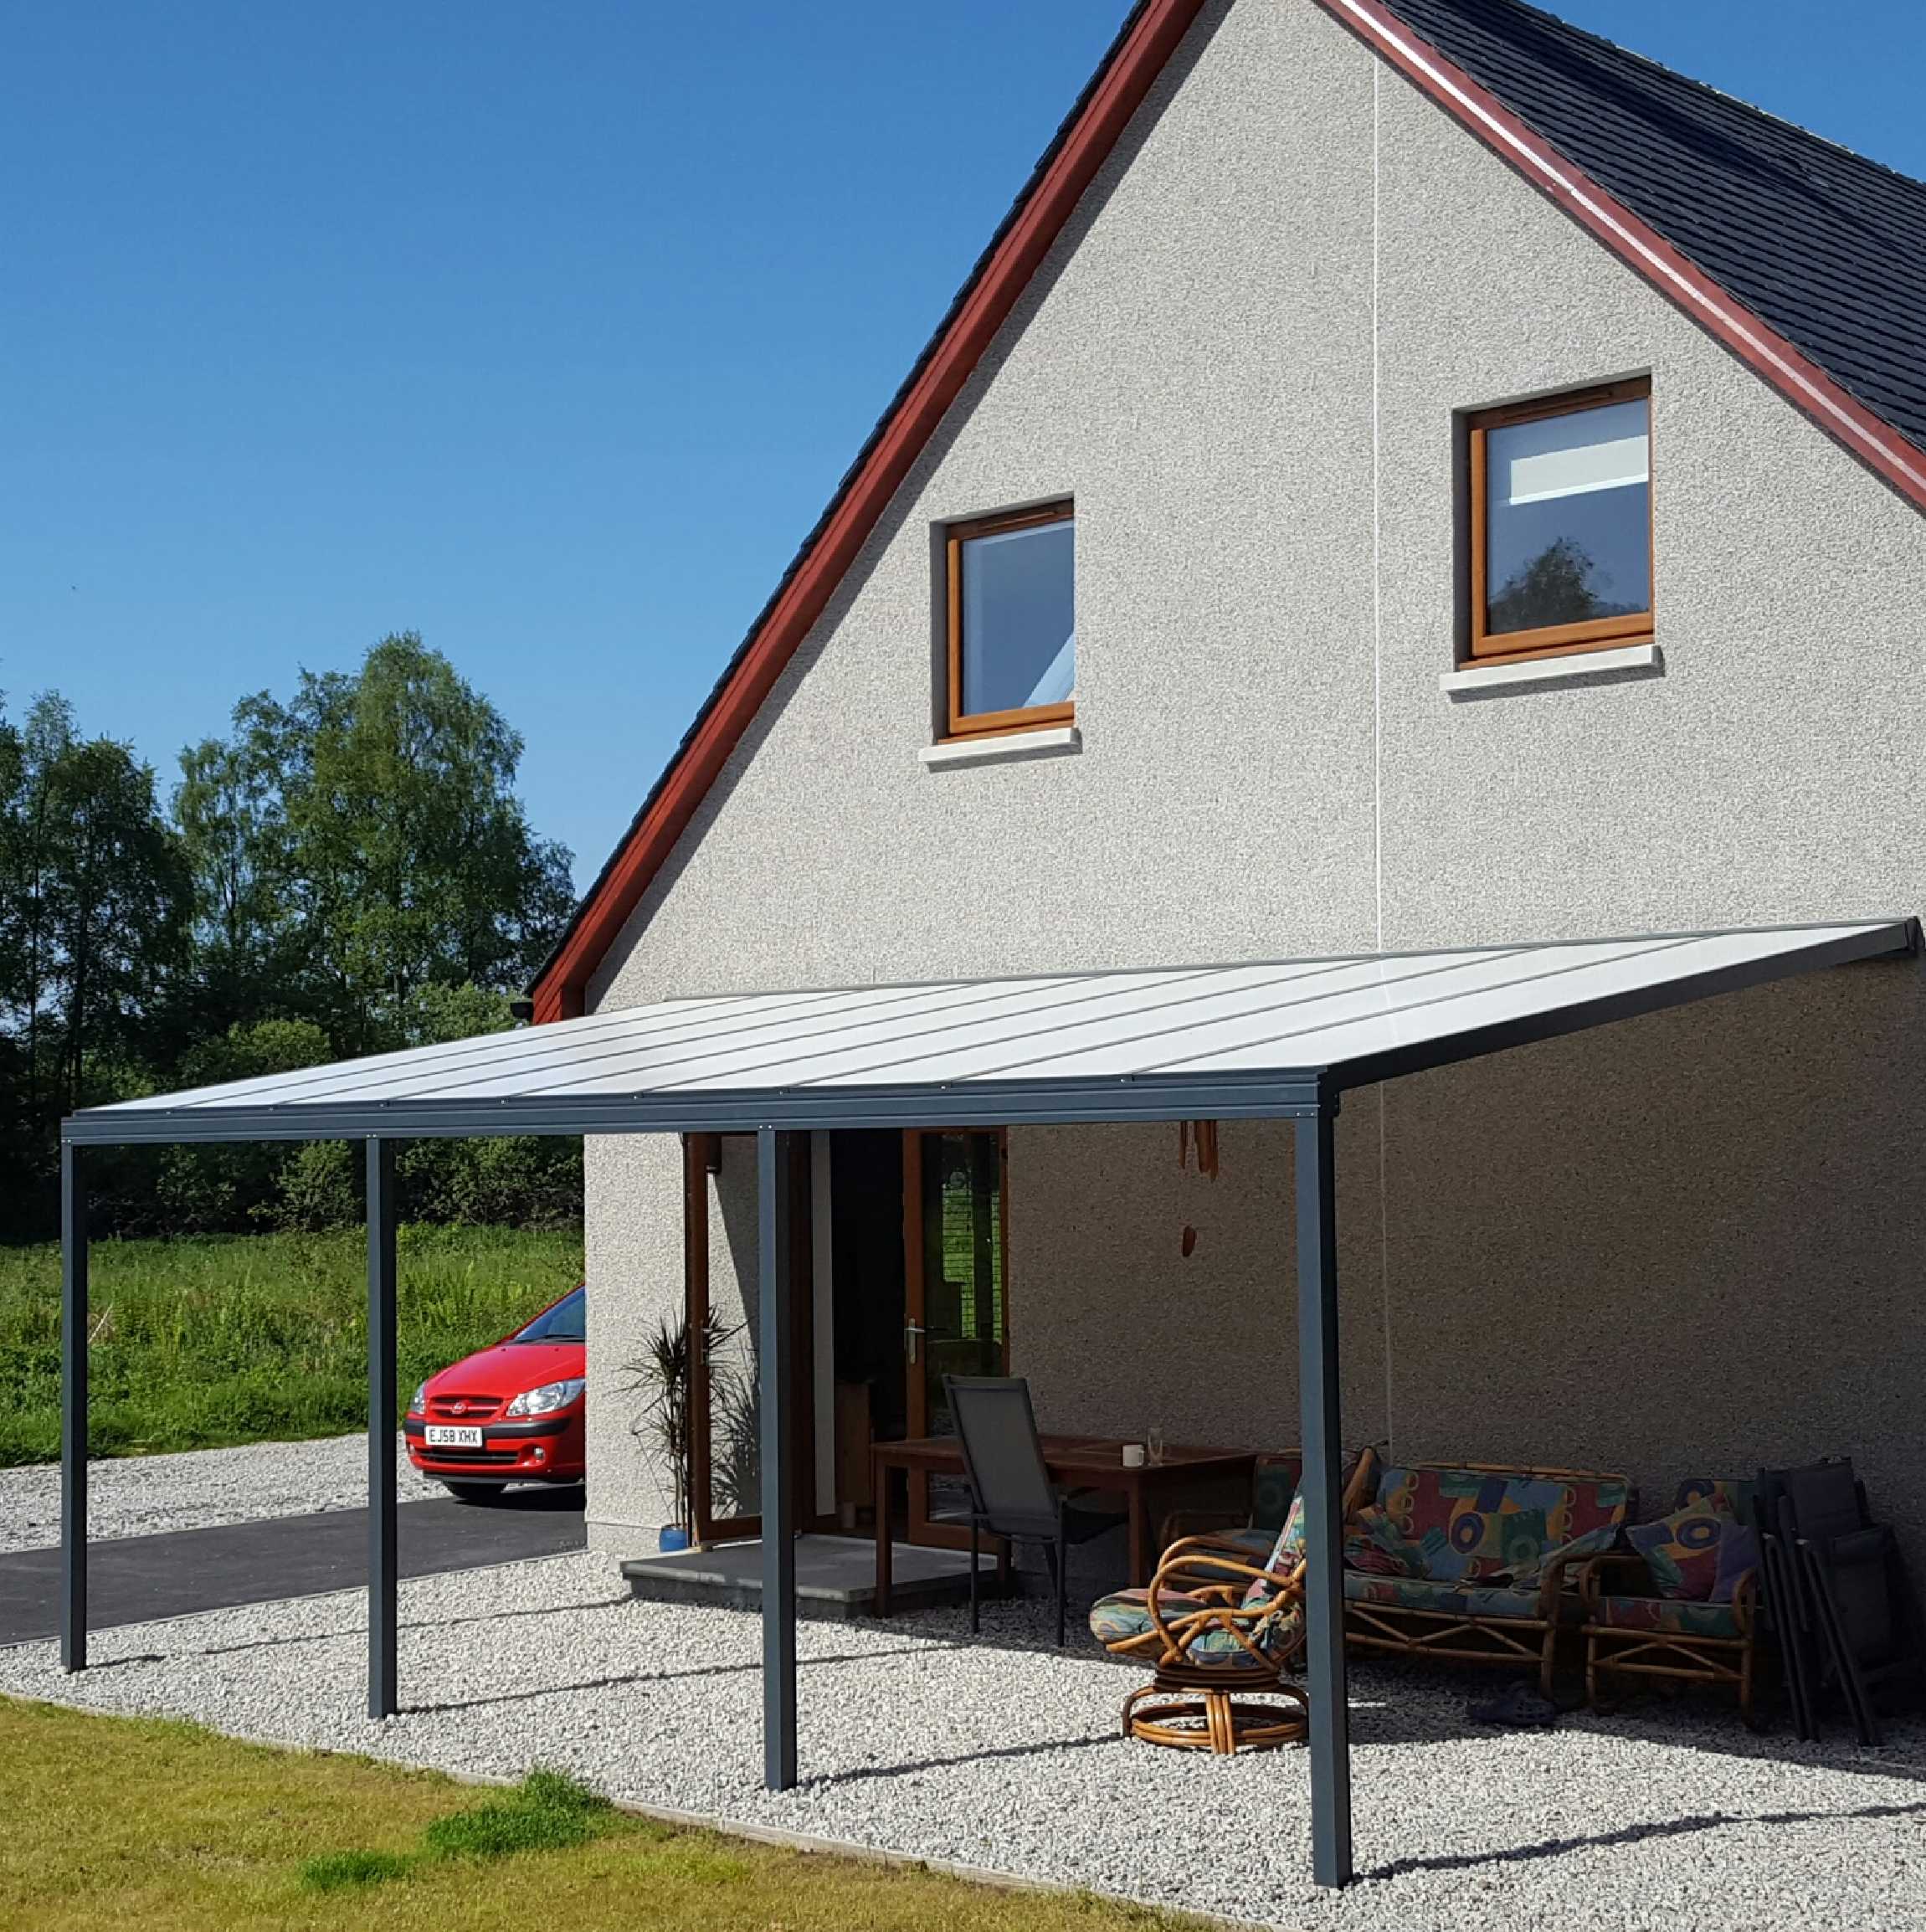 Great selection of Omega Smart Lean-To Canopy, Anthracite Grey, 16mm Polycarbonate Glazing - 10.7m (W) x 4.5m (P), (5) Supporting Posts